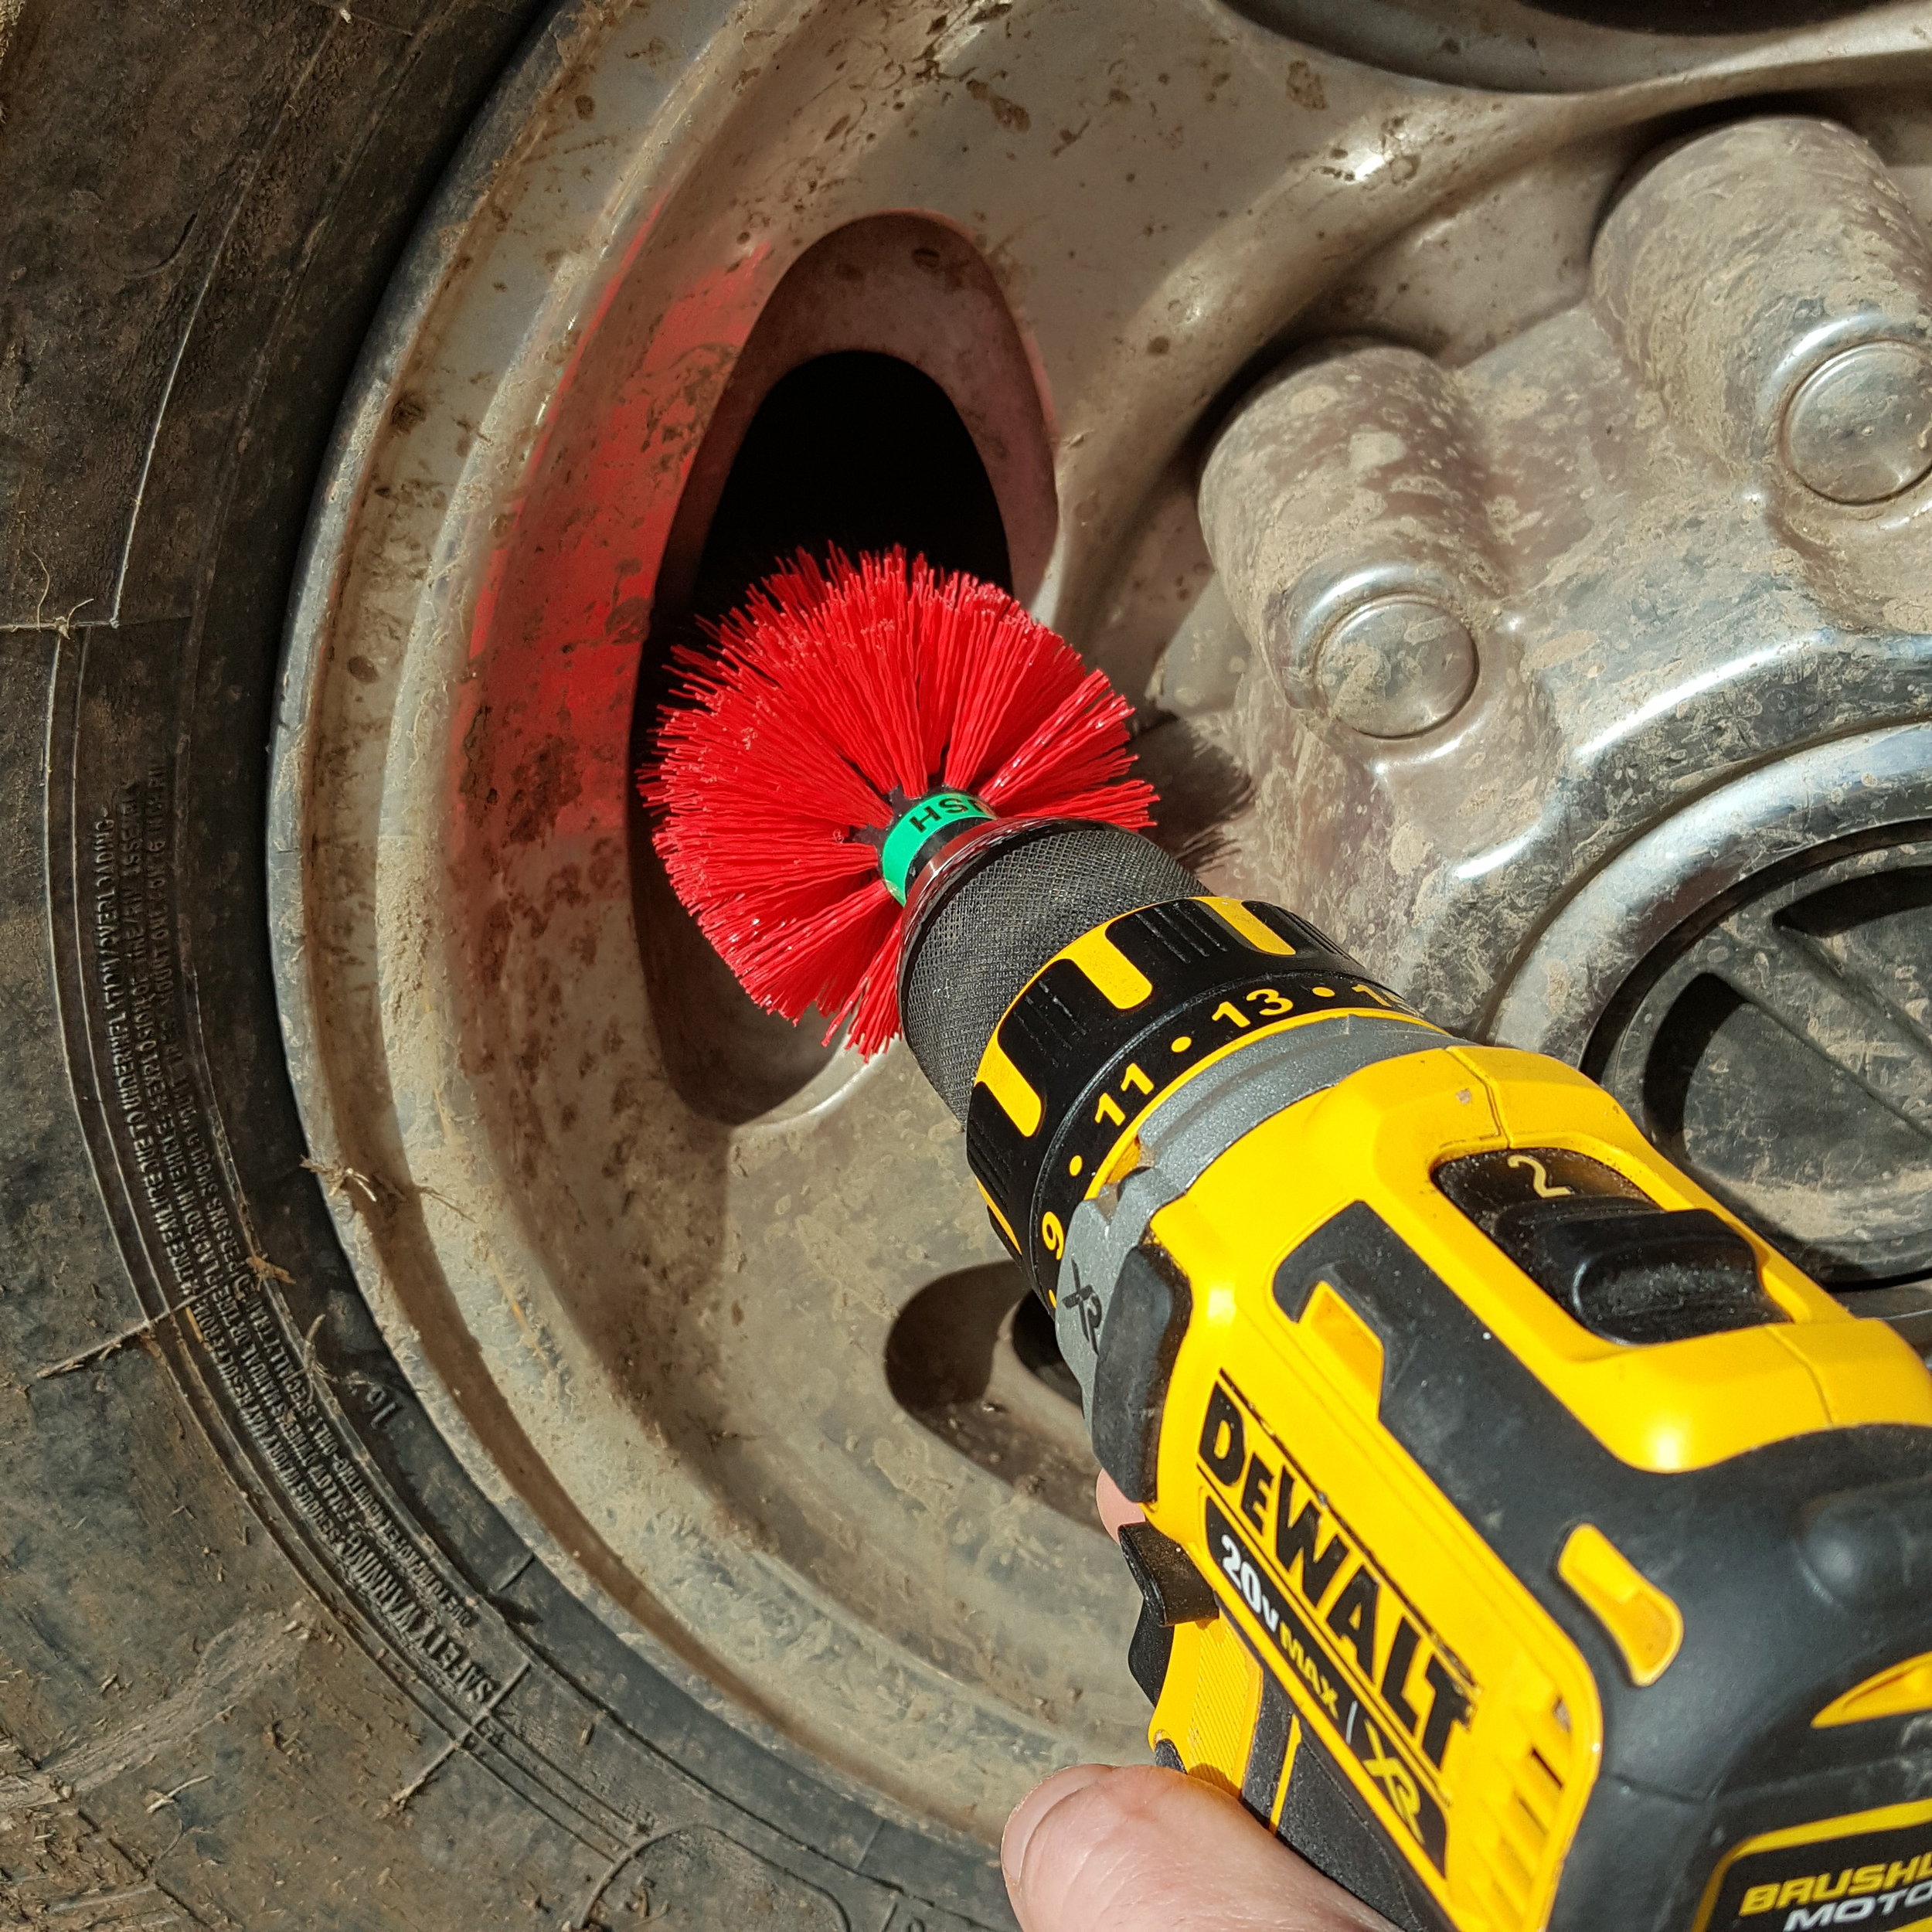 Cleaning Rims with Drill Brushes